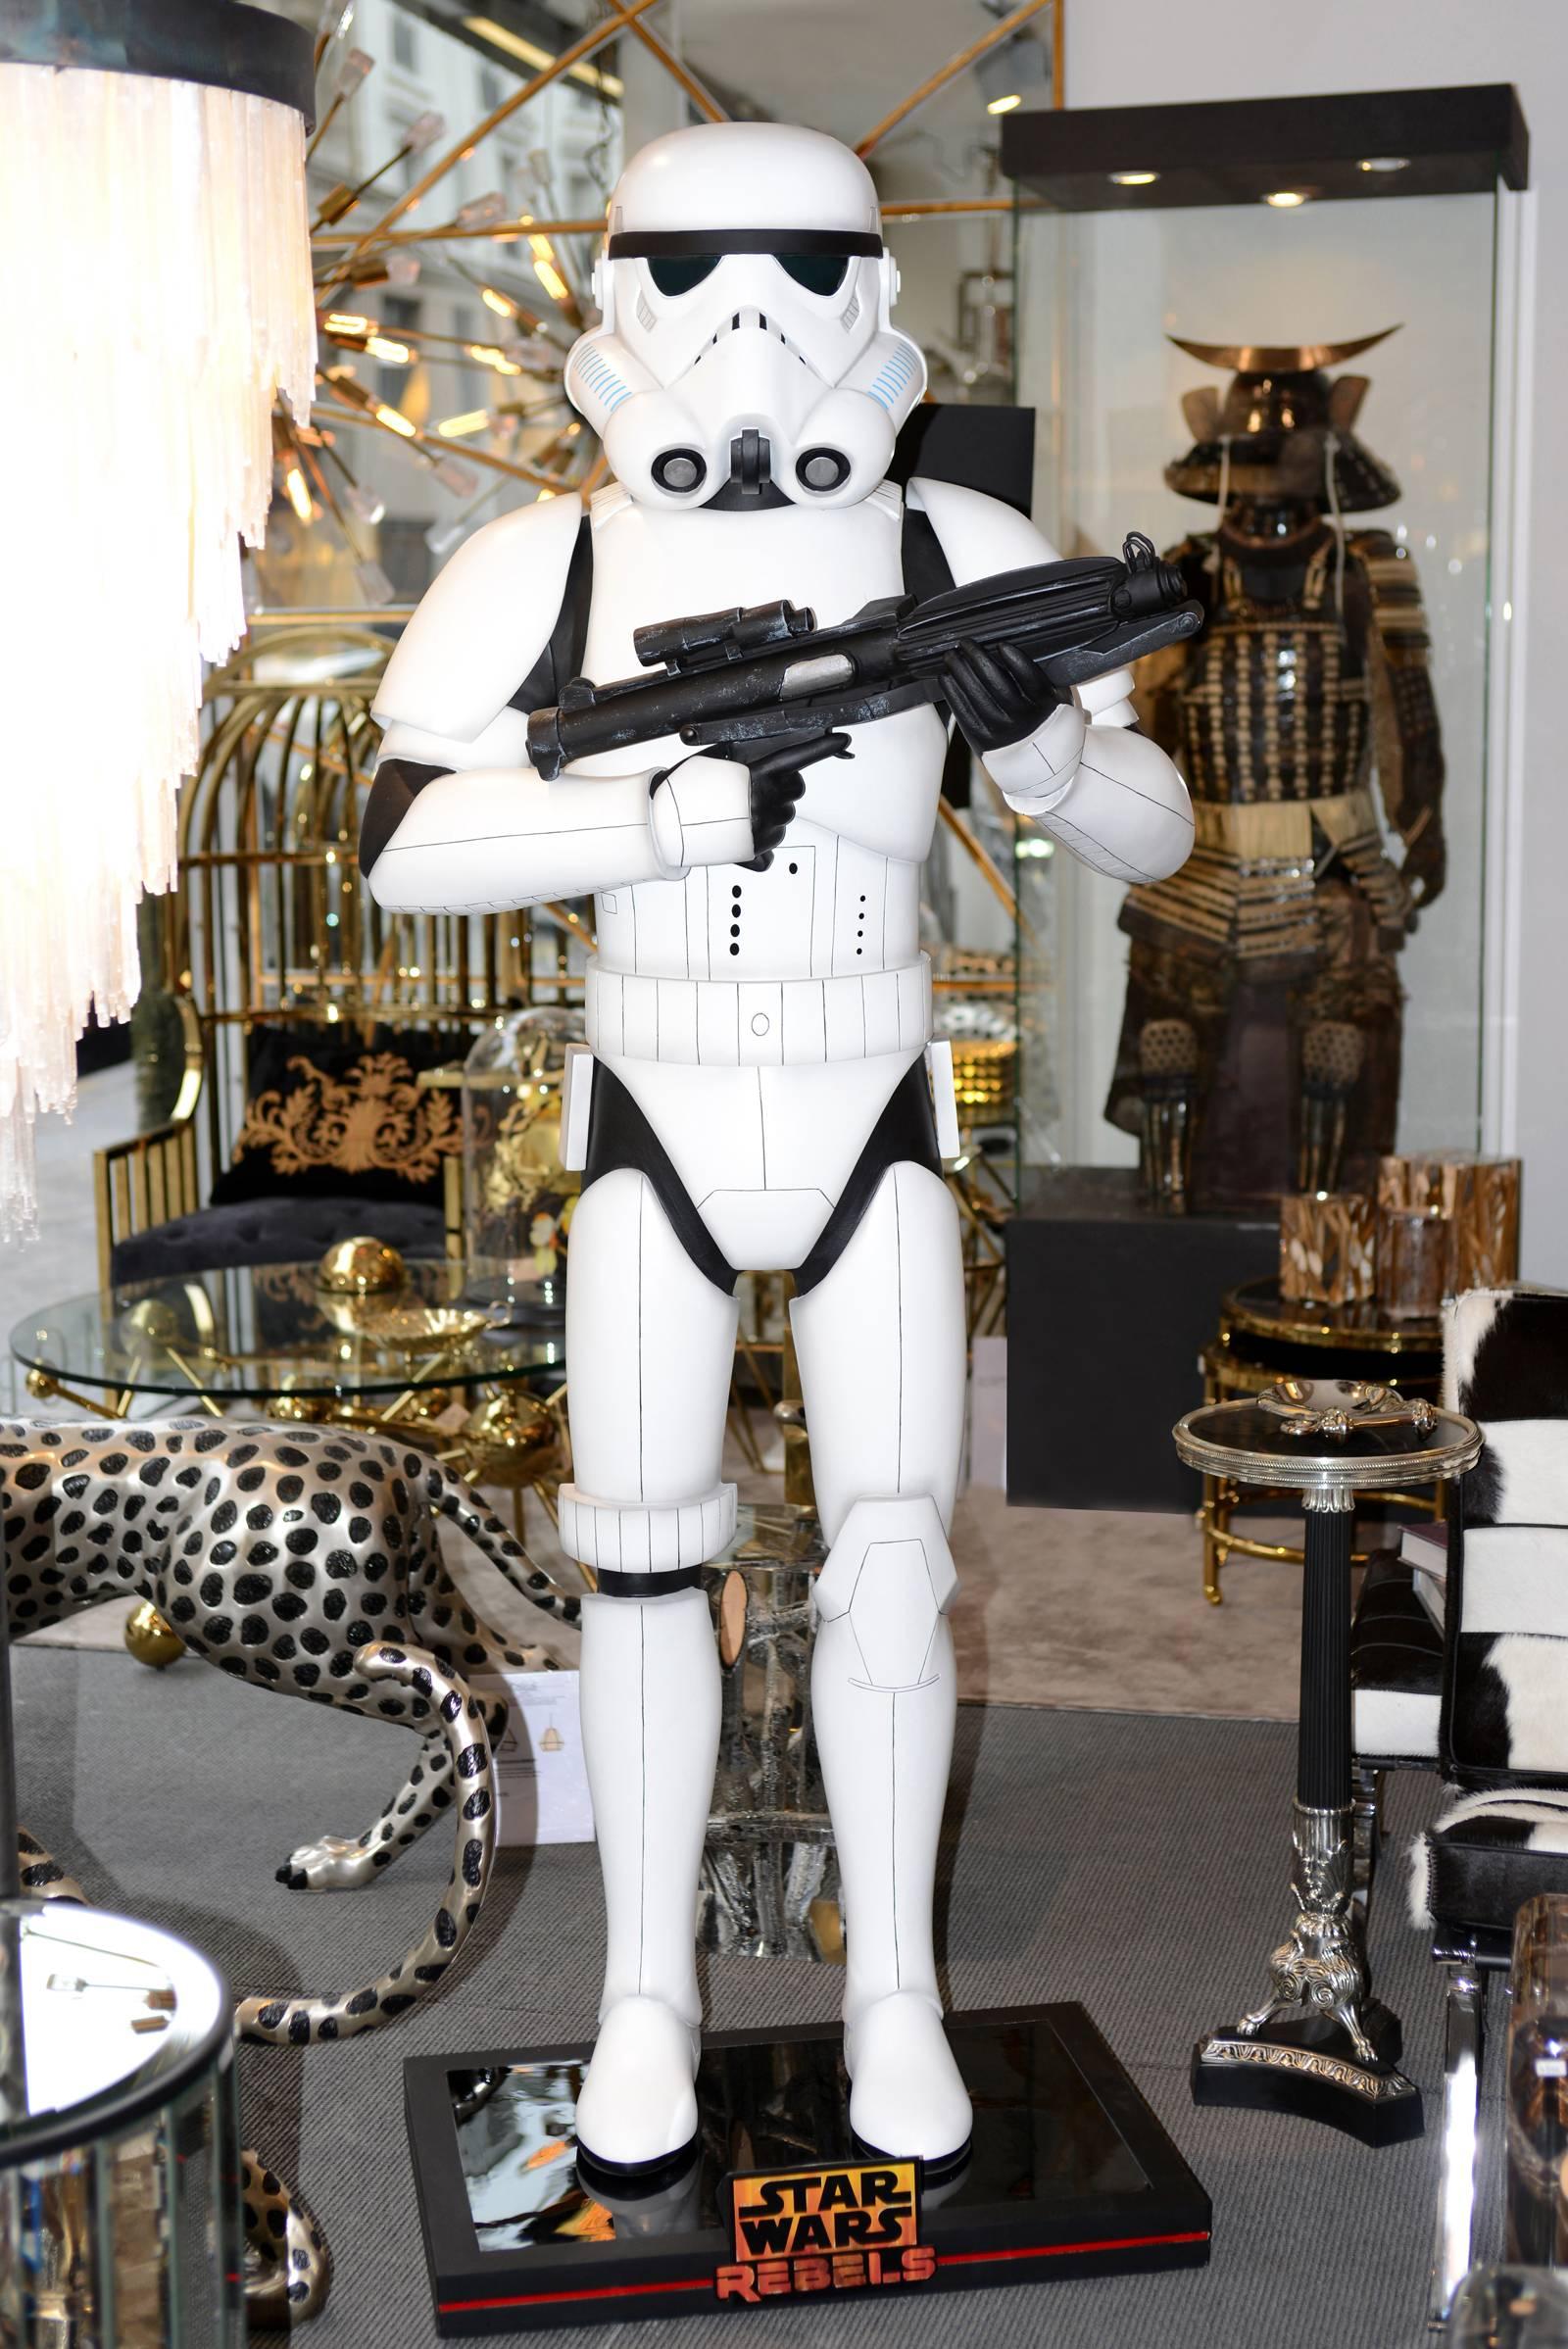 Stormtrooper With Bent Arm Life Size Star Wars, Licensed Figure,
Lucas Film, in Limited Edition 333 pieces. In Fiberglass.

 